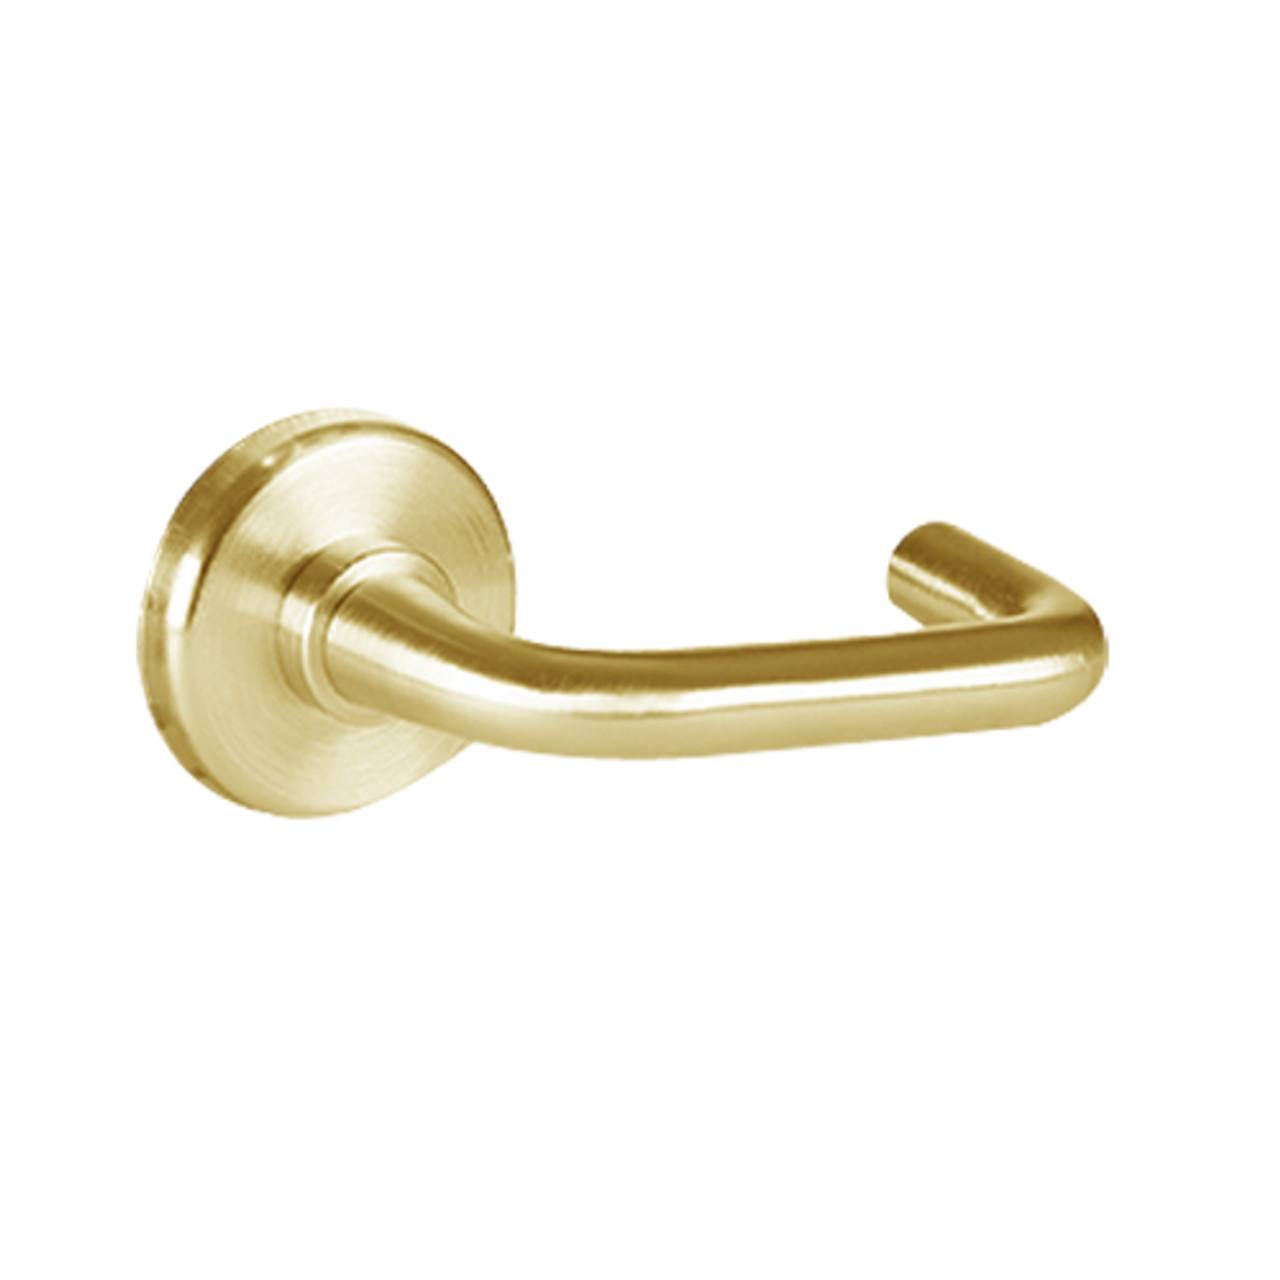 40HTKIS33H606 Best 40H Series Trim Kits Inside Lever w/ Cylinder with Solid Tube-Return Trim Style in Satin Brass